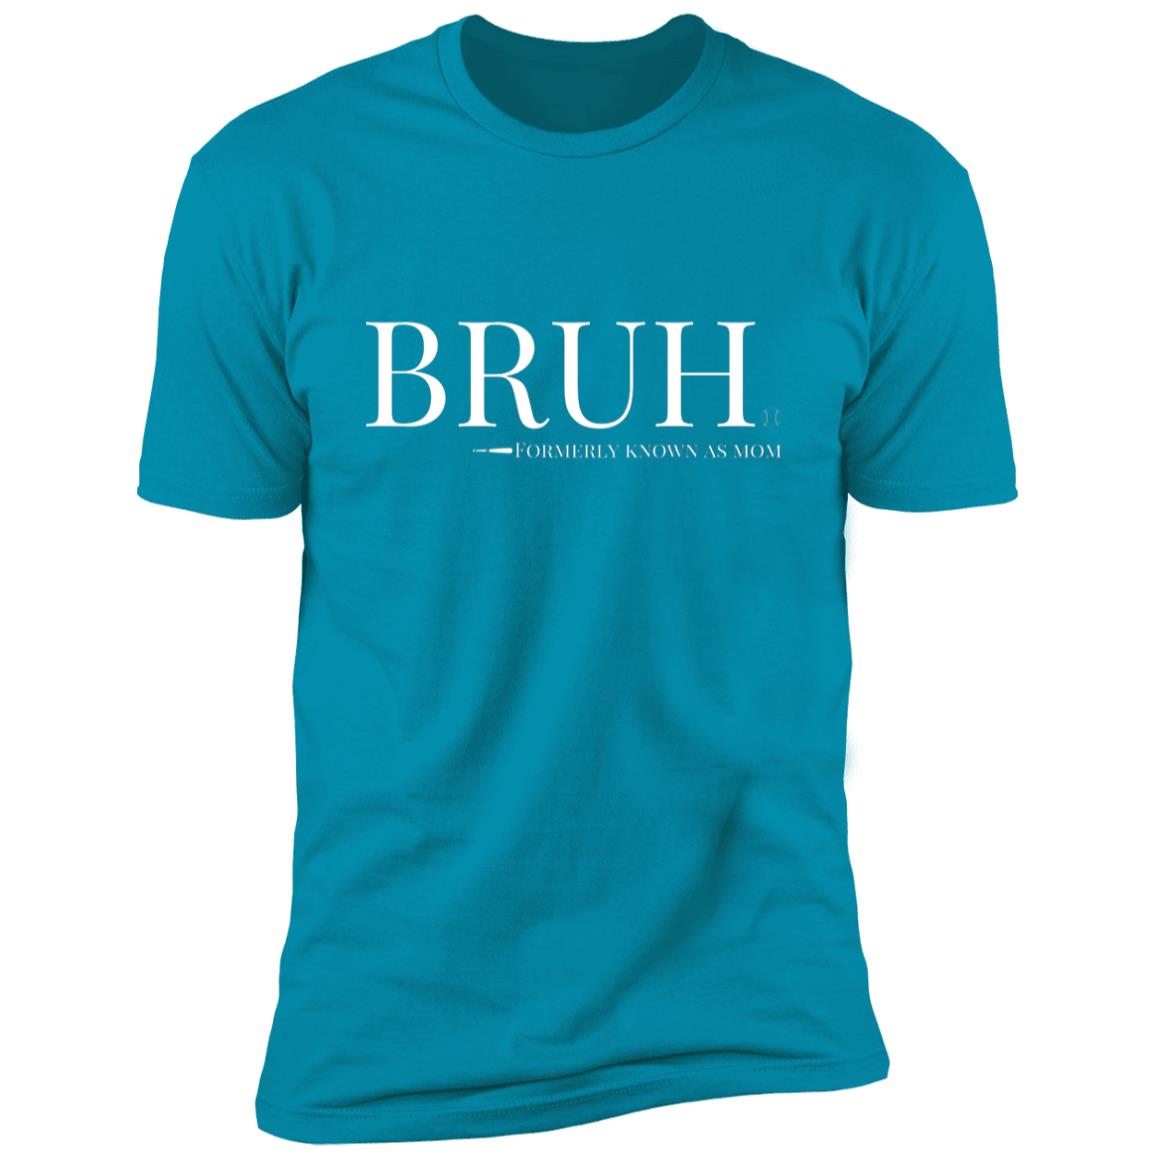 Bruh: Formerly Known As Mom Short Sleeve Tee teal blue